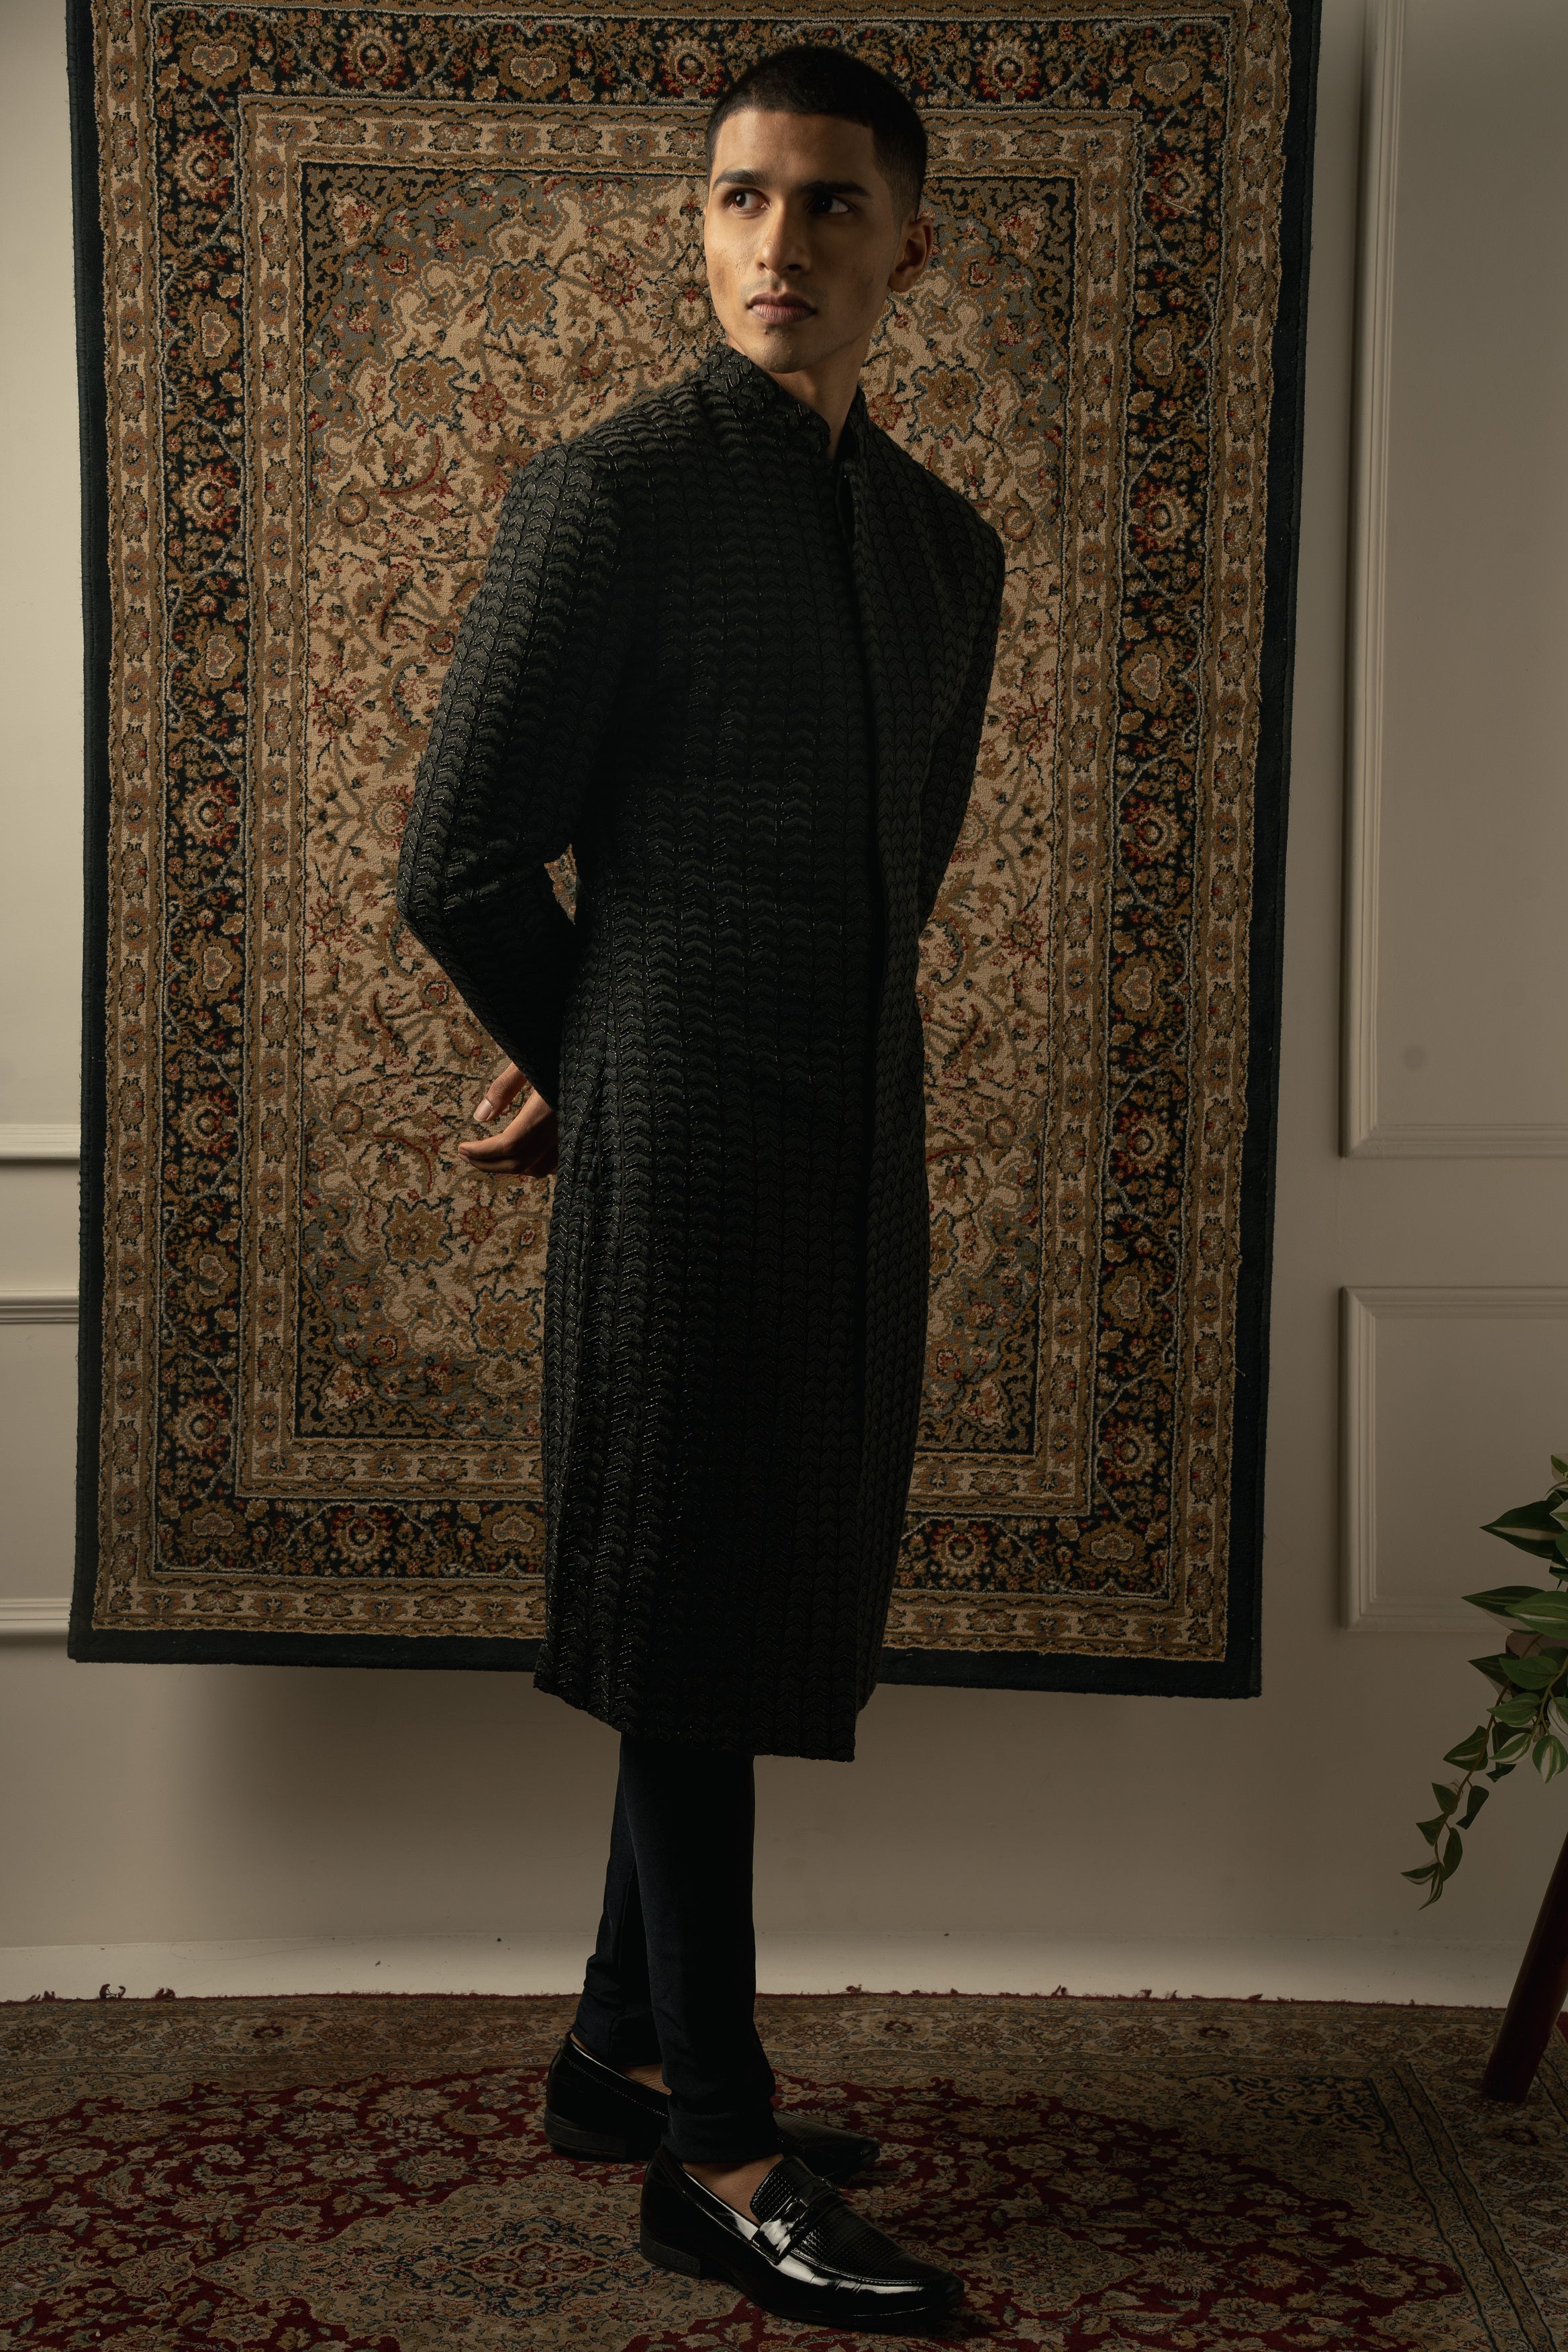 Make a statement in sophistication with this Black Silk Sherwani, complemented by Spandex Kurta and Pants for a contemporary twist.